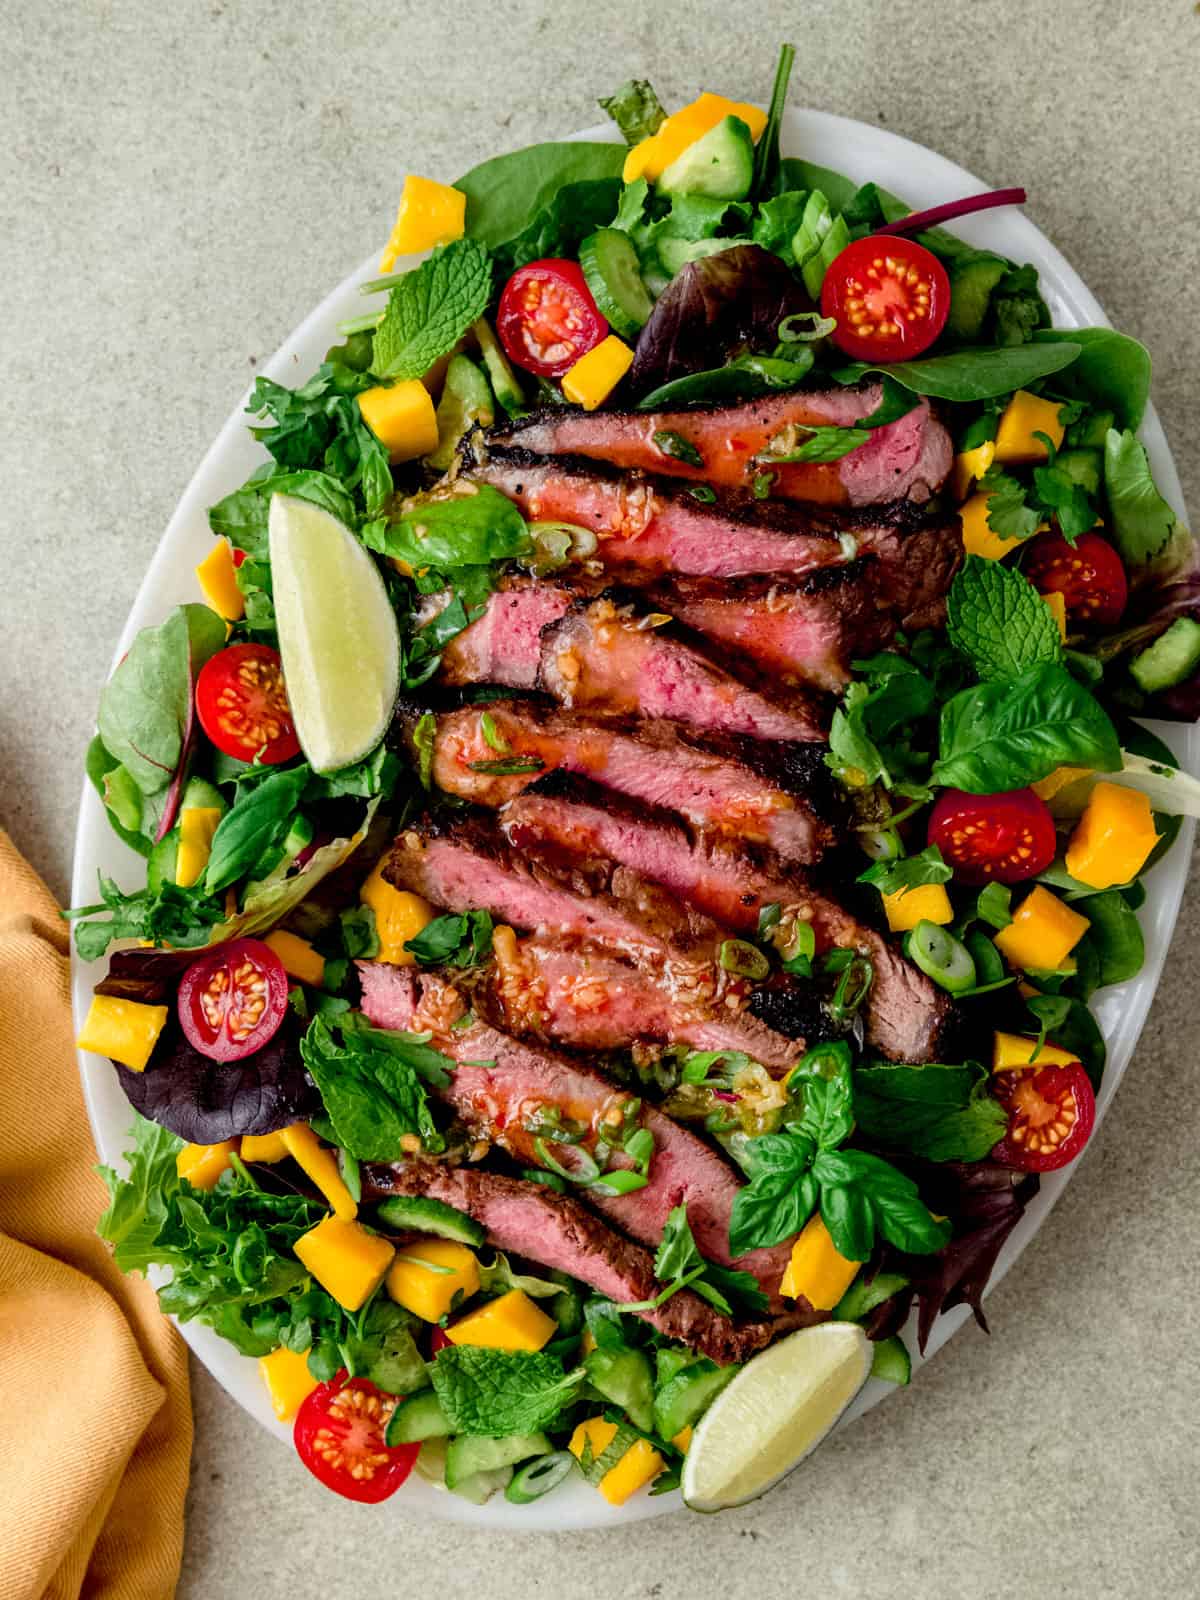 Thai beef salad with mango and chili lime dressing.